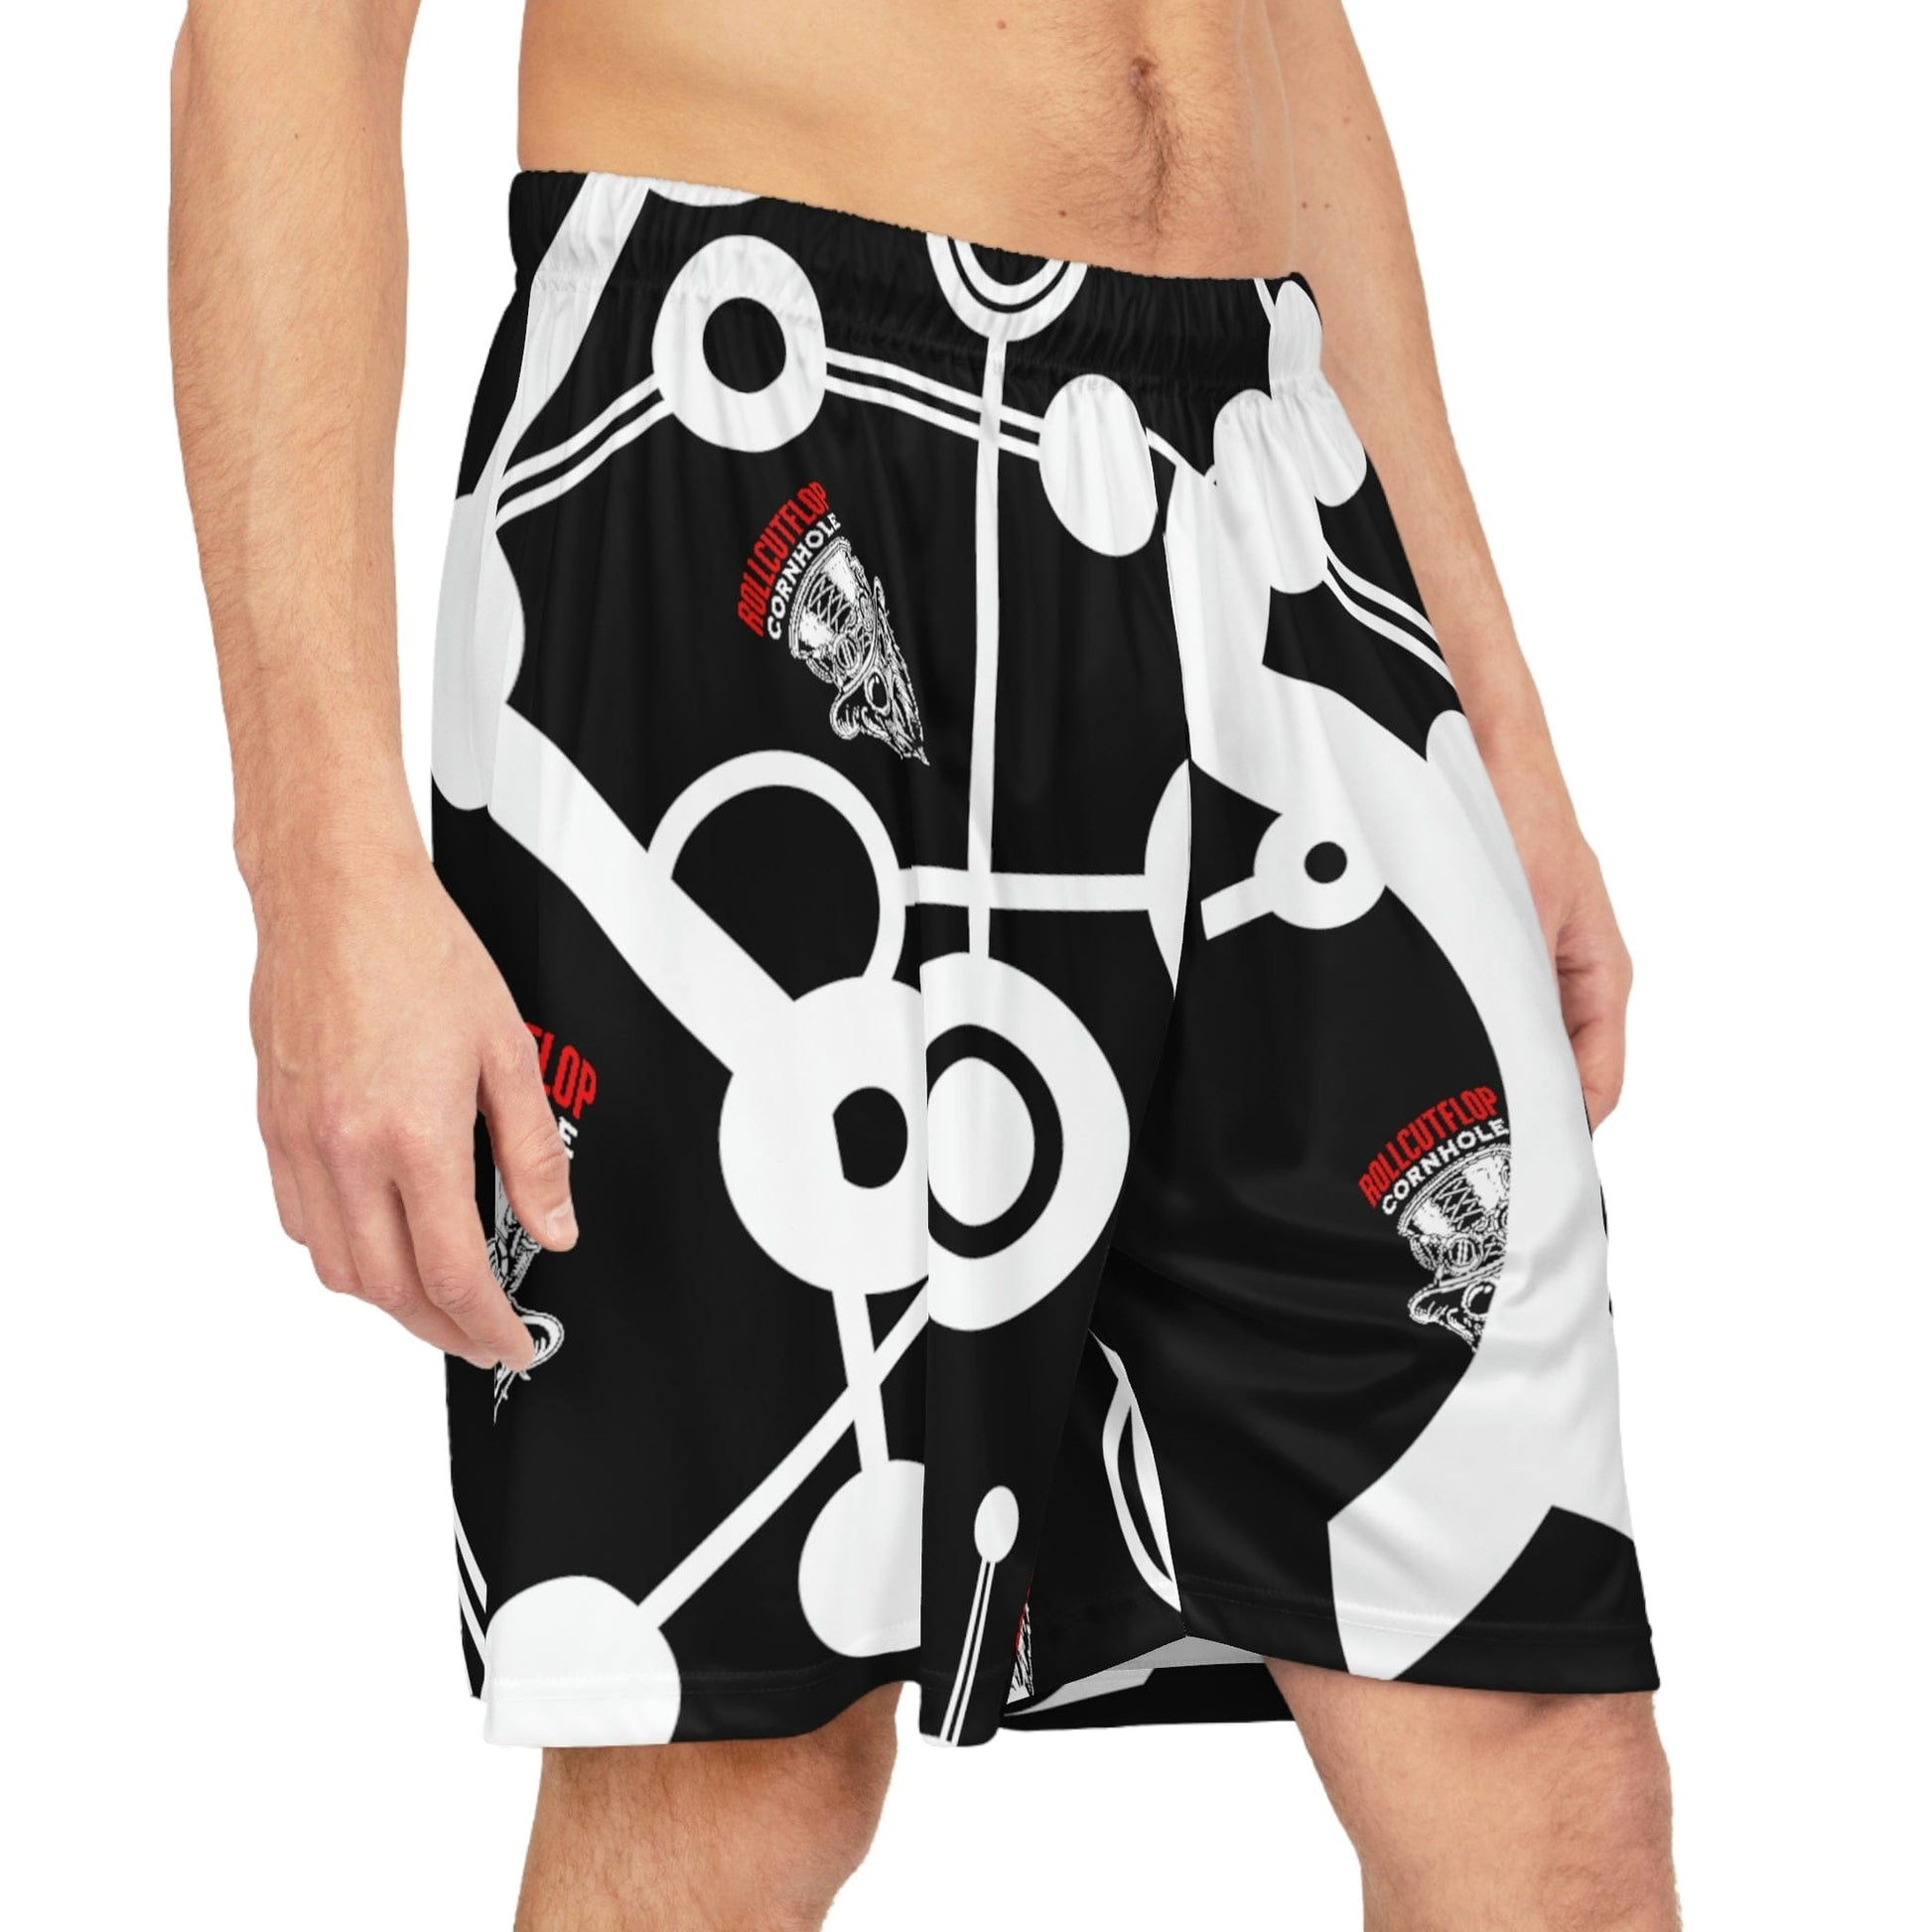 Roll Cut Flop™ All Over Print Black, Red & White Basketball Shorts - Steampunk Gorilla Logo with White Gear Print - Side view